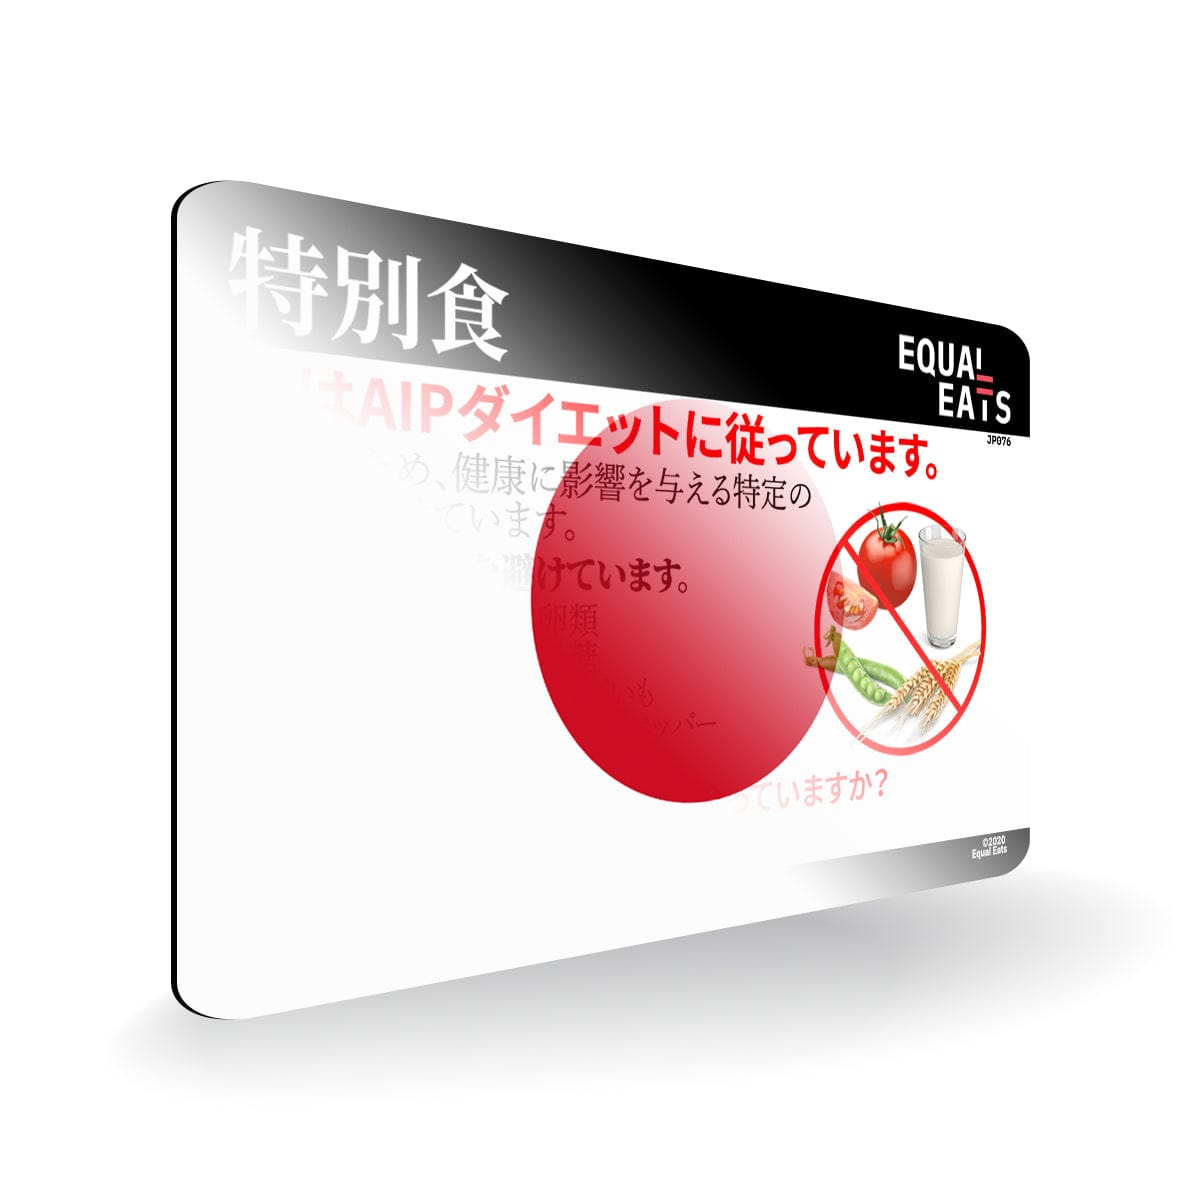 AIP Diet in Japanese. AIP Diet Card for Japan